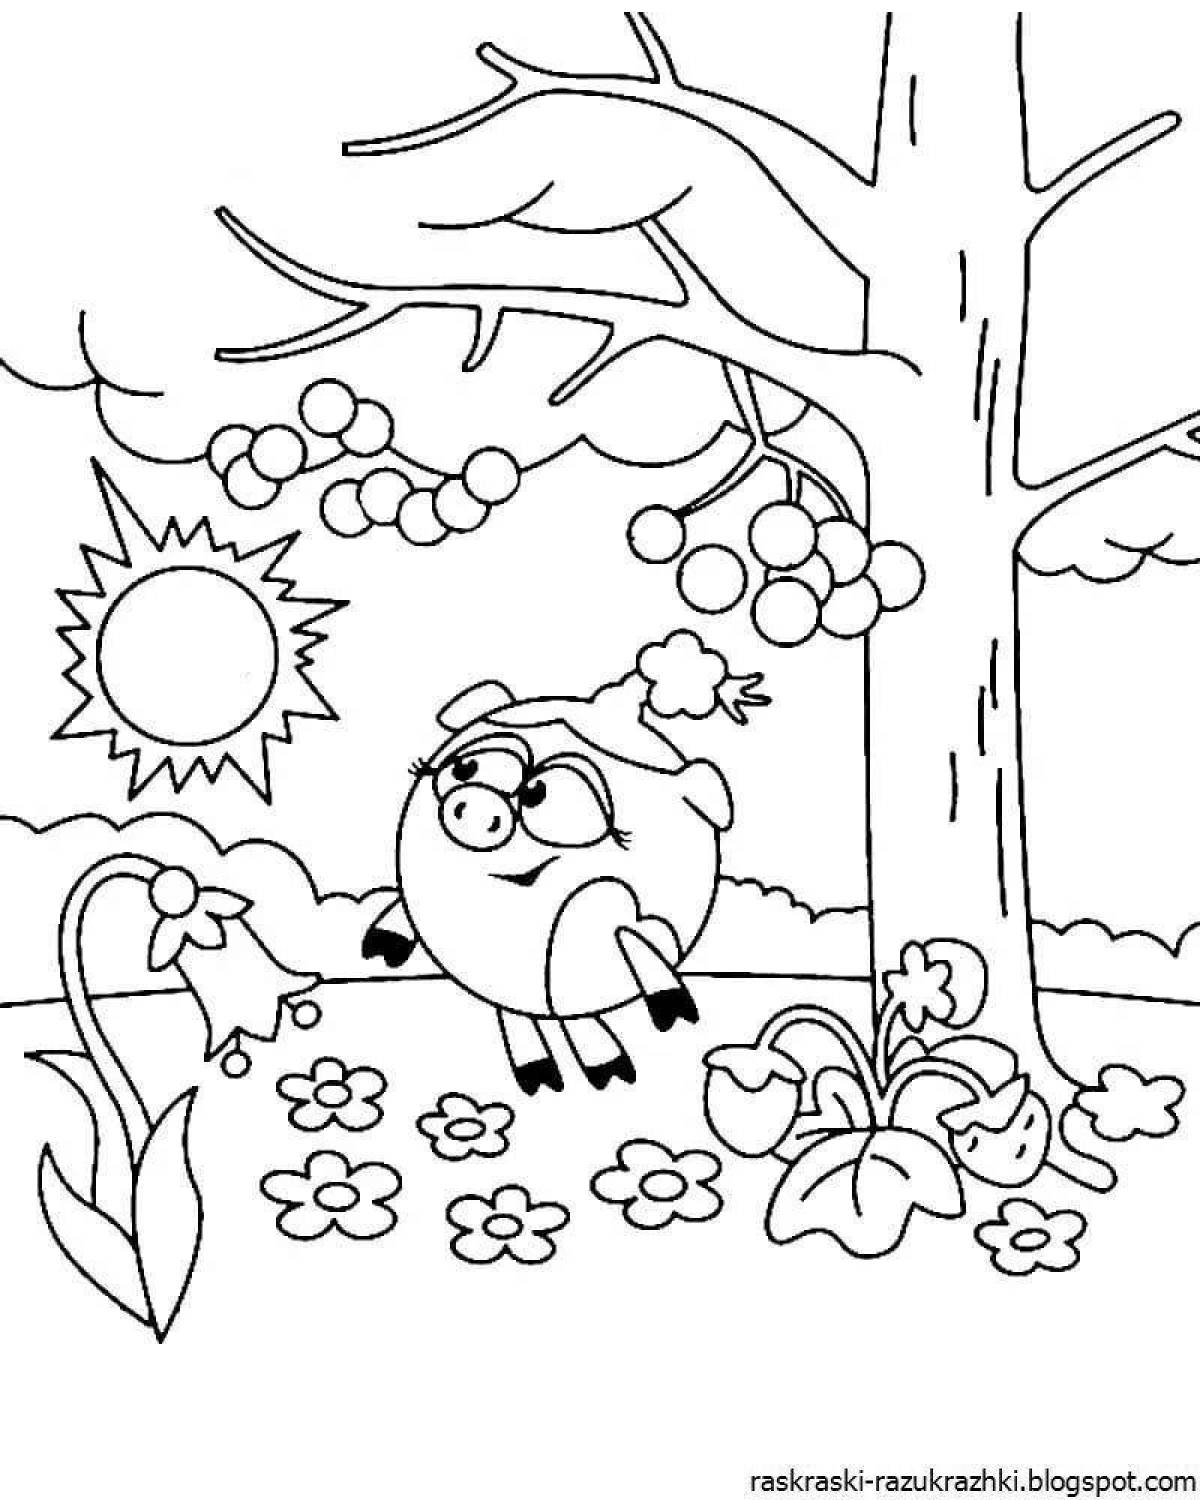 Cute children's smeshariki coloring pages